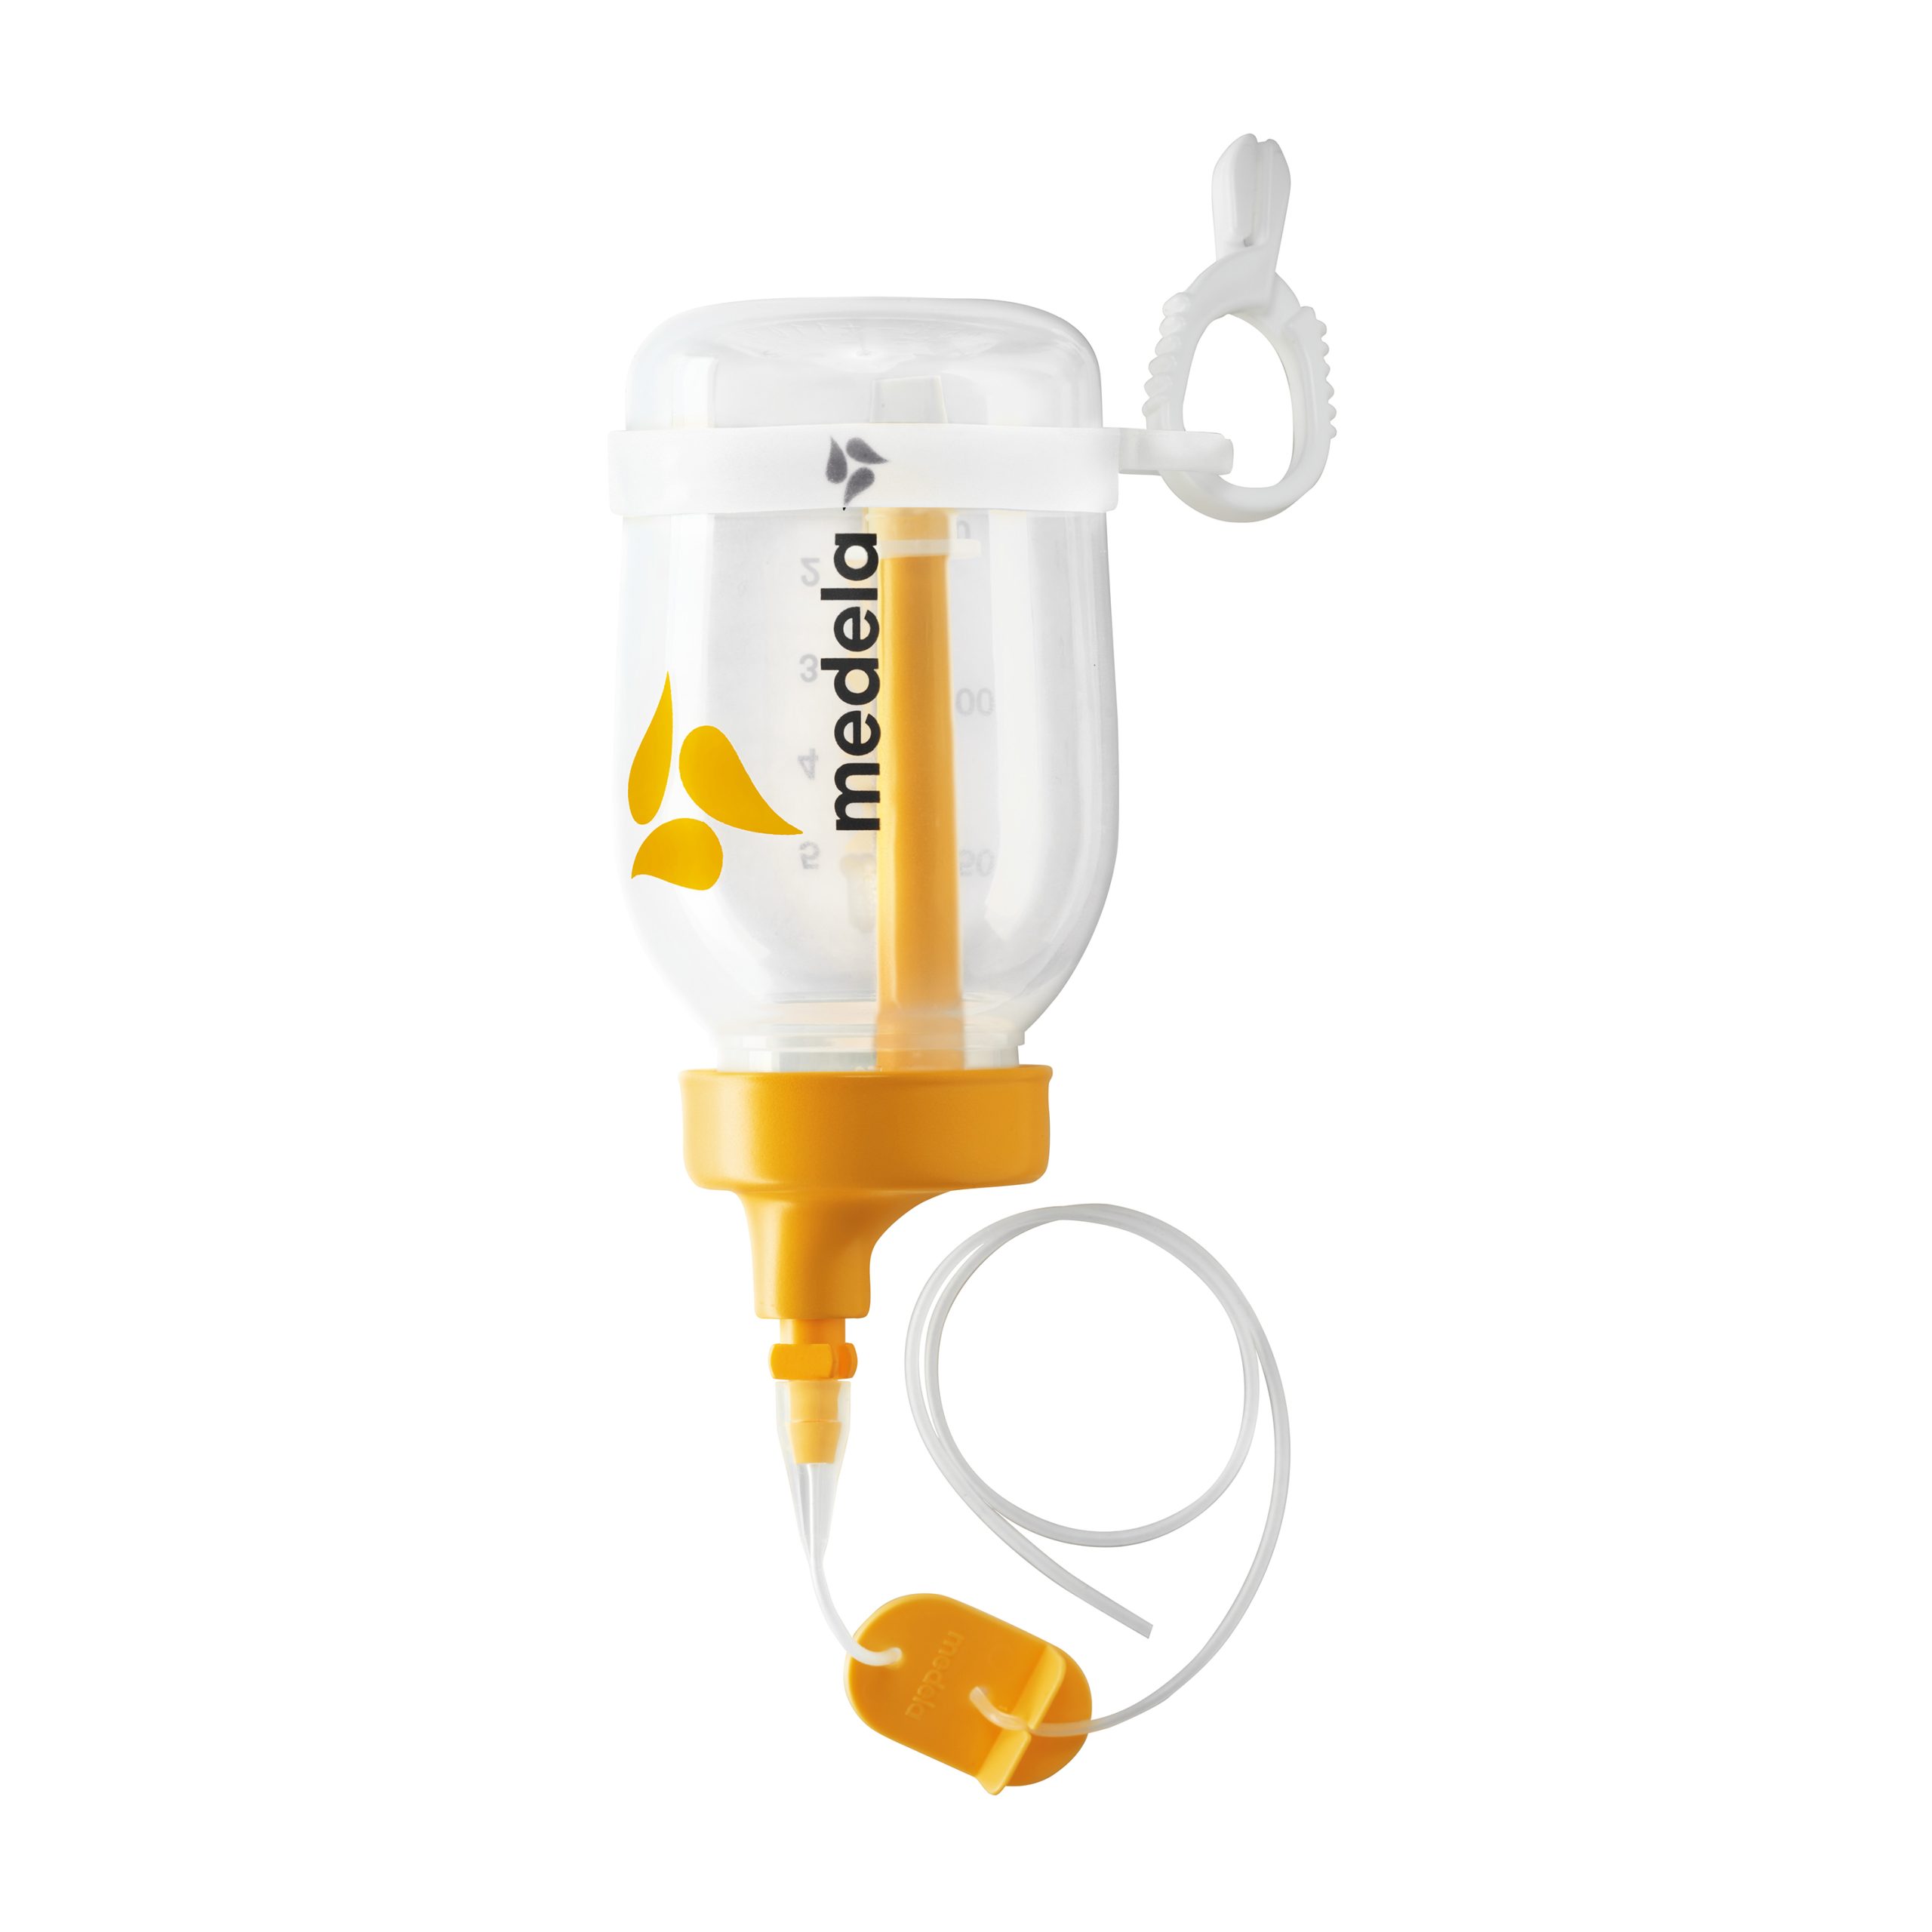 Medela Pump In Style Hands-free Breast Pump - Acelleron Medical Products